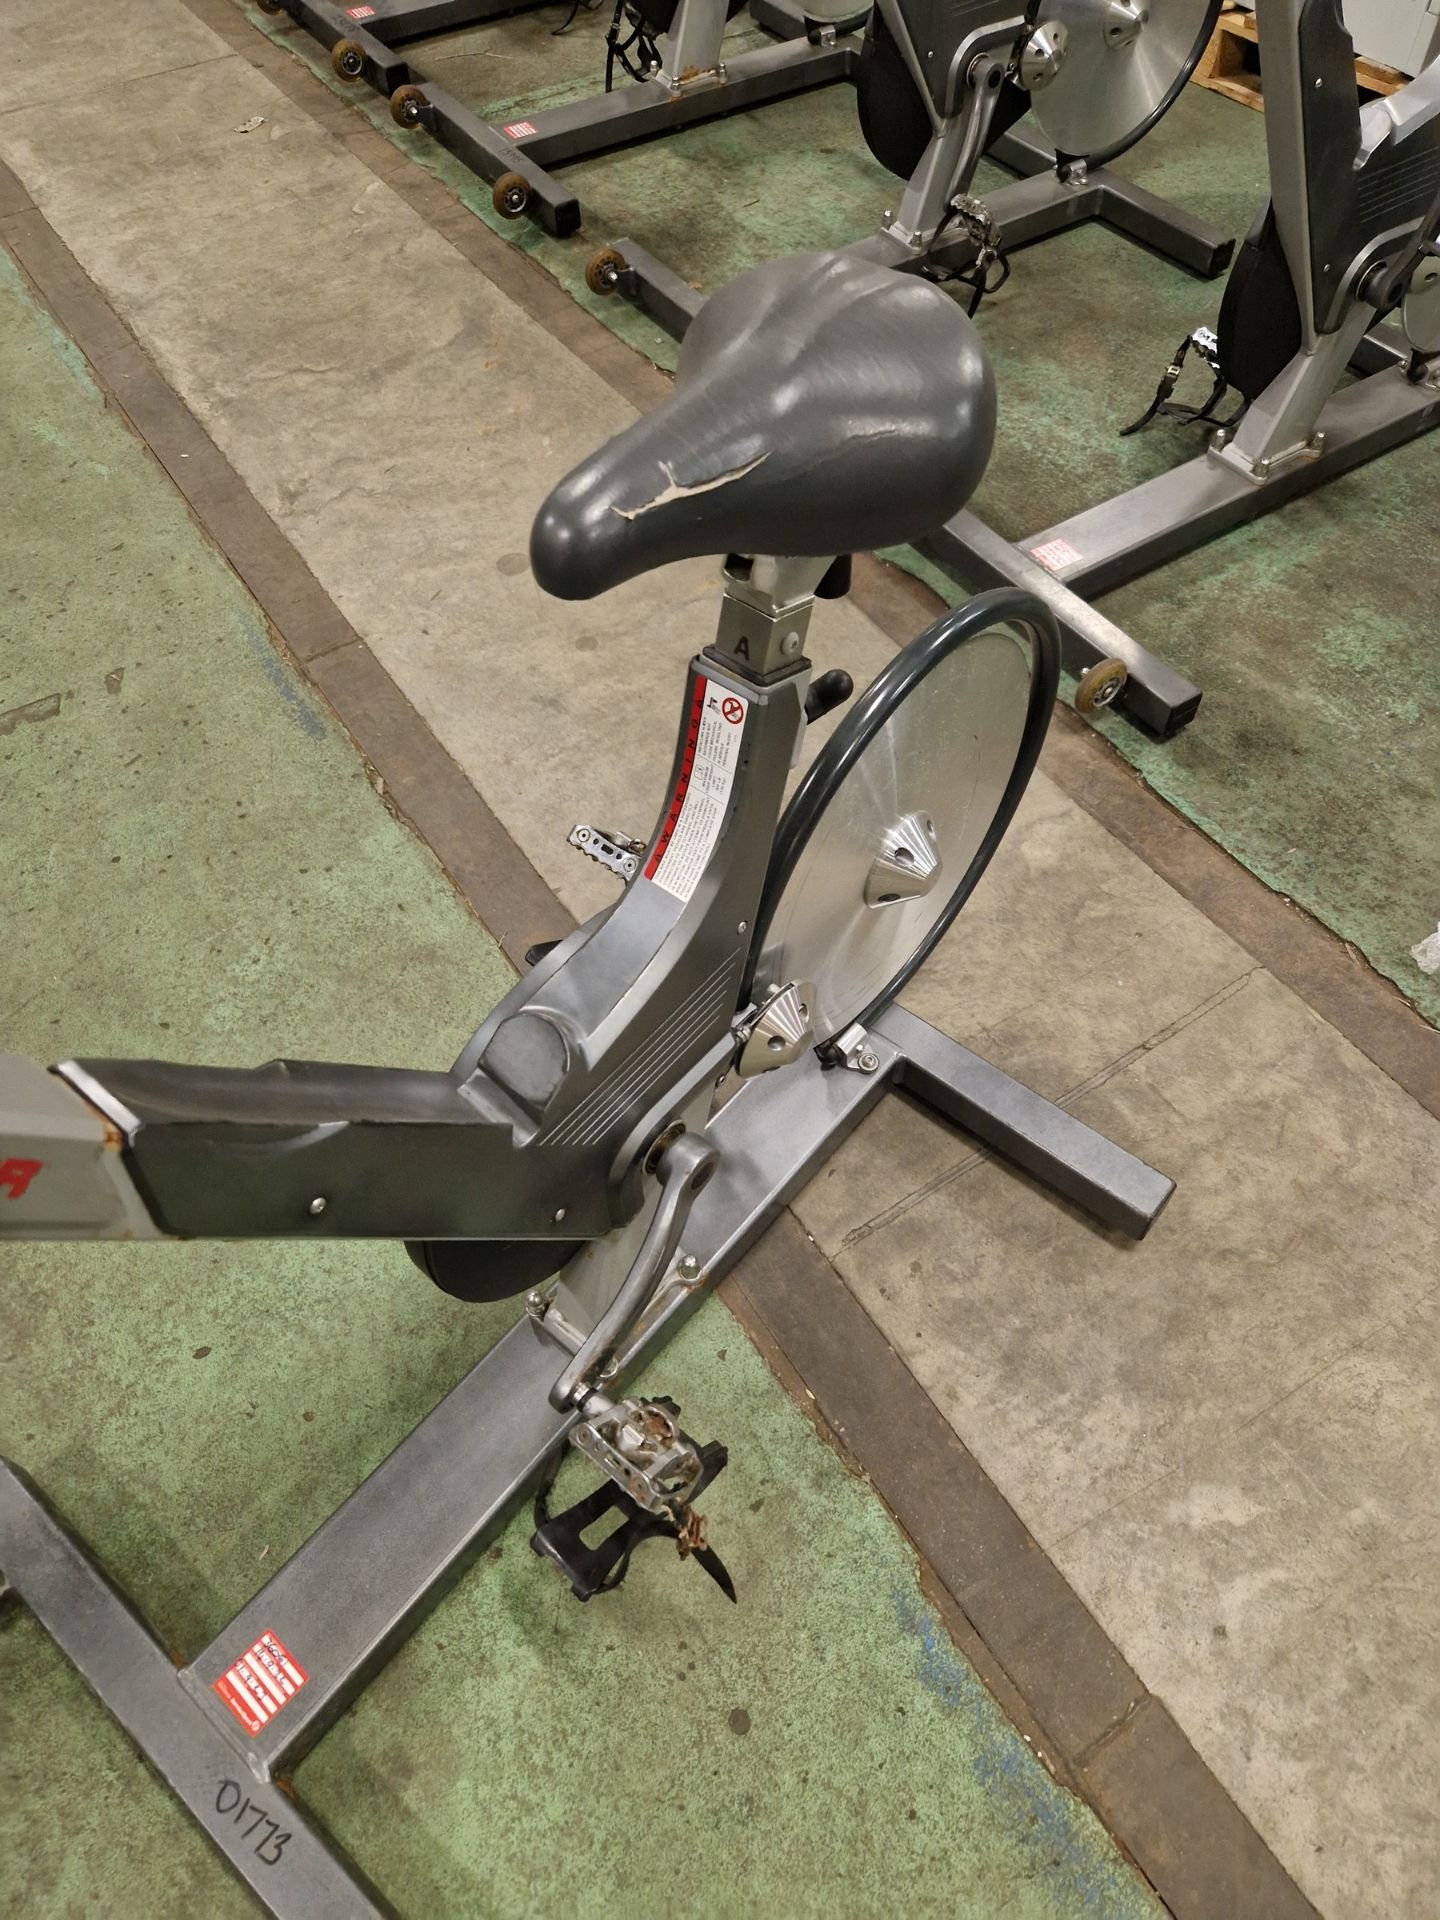 Keiser M3 exercise spin bike - NON FUNCTIONAL DISPLAY - Image 2 of 4